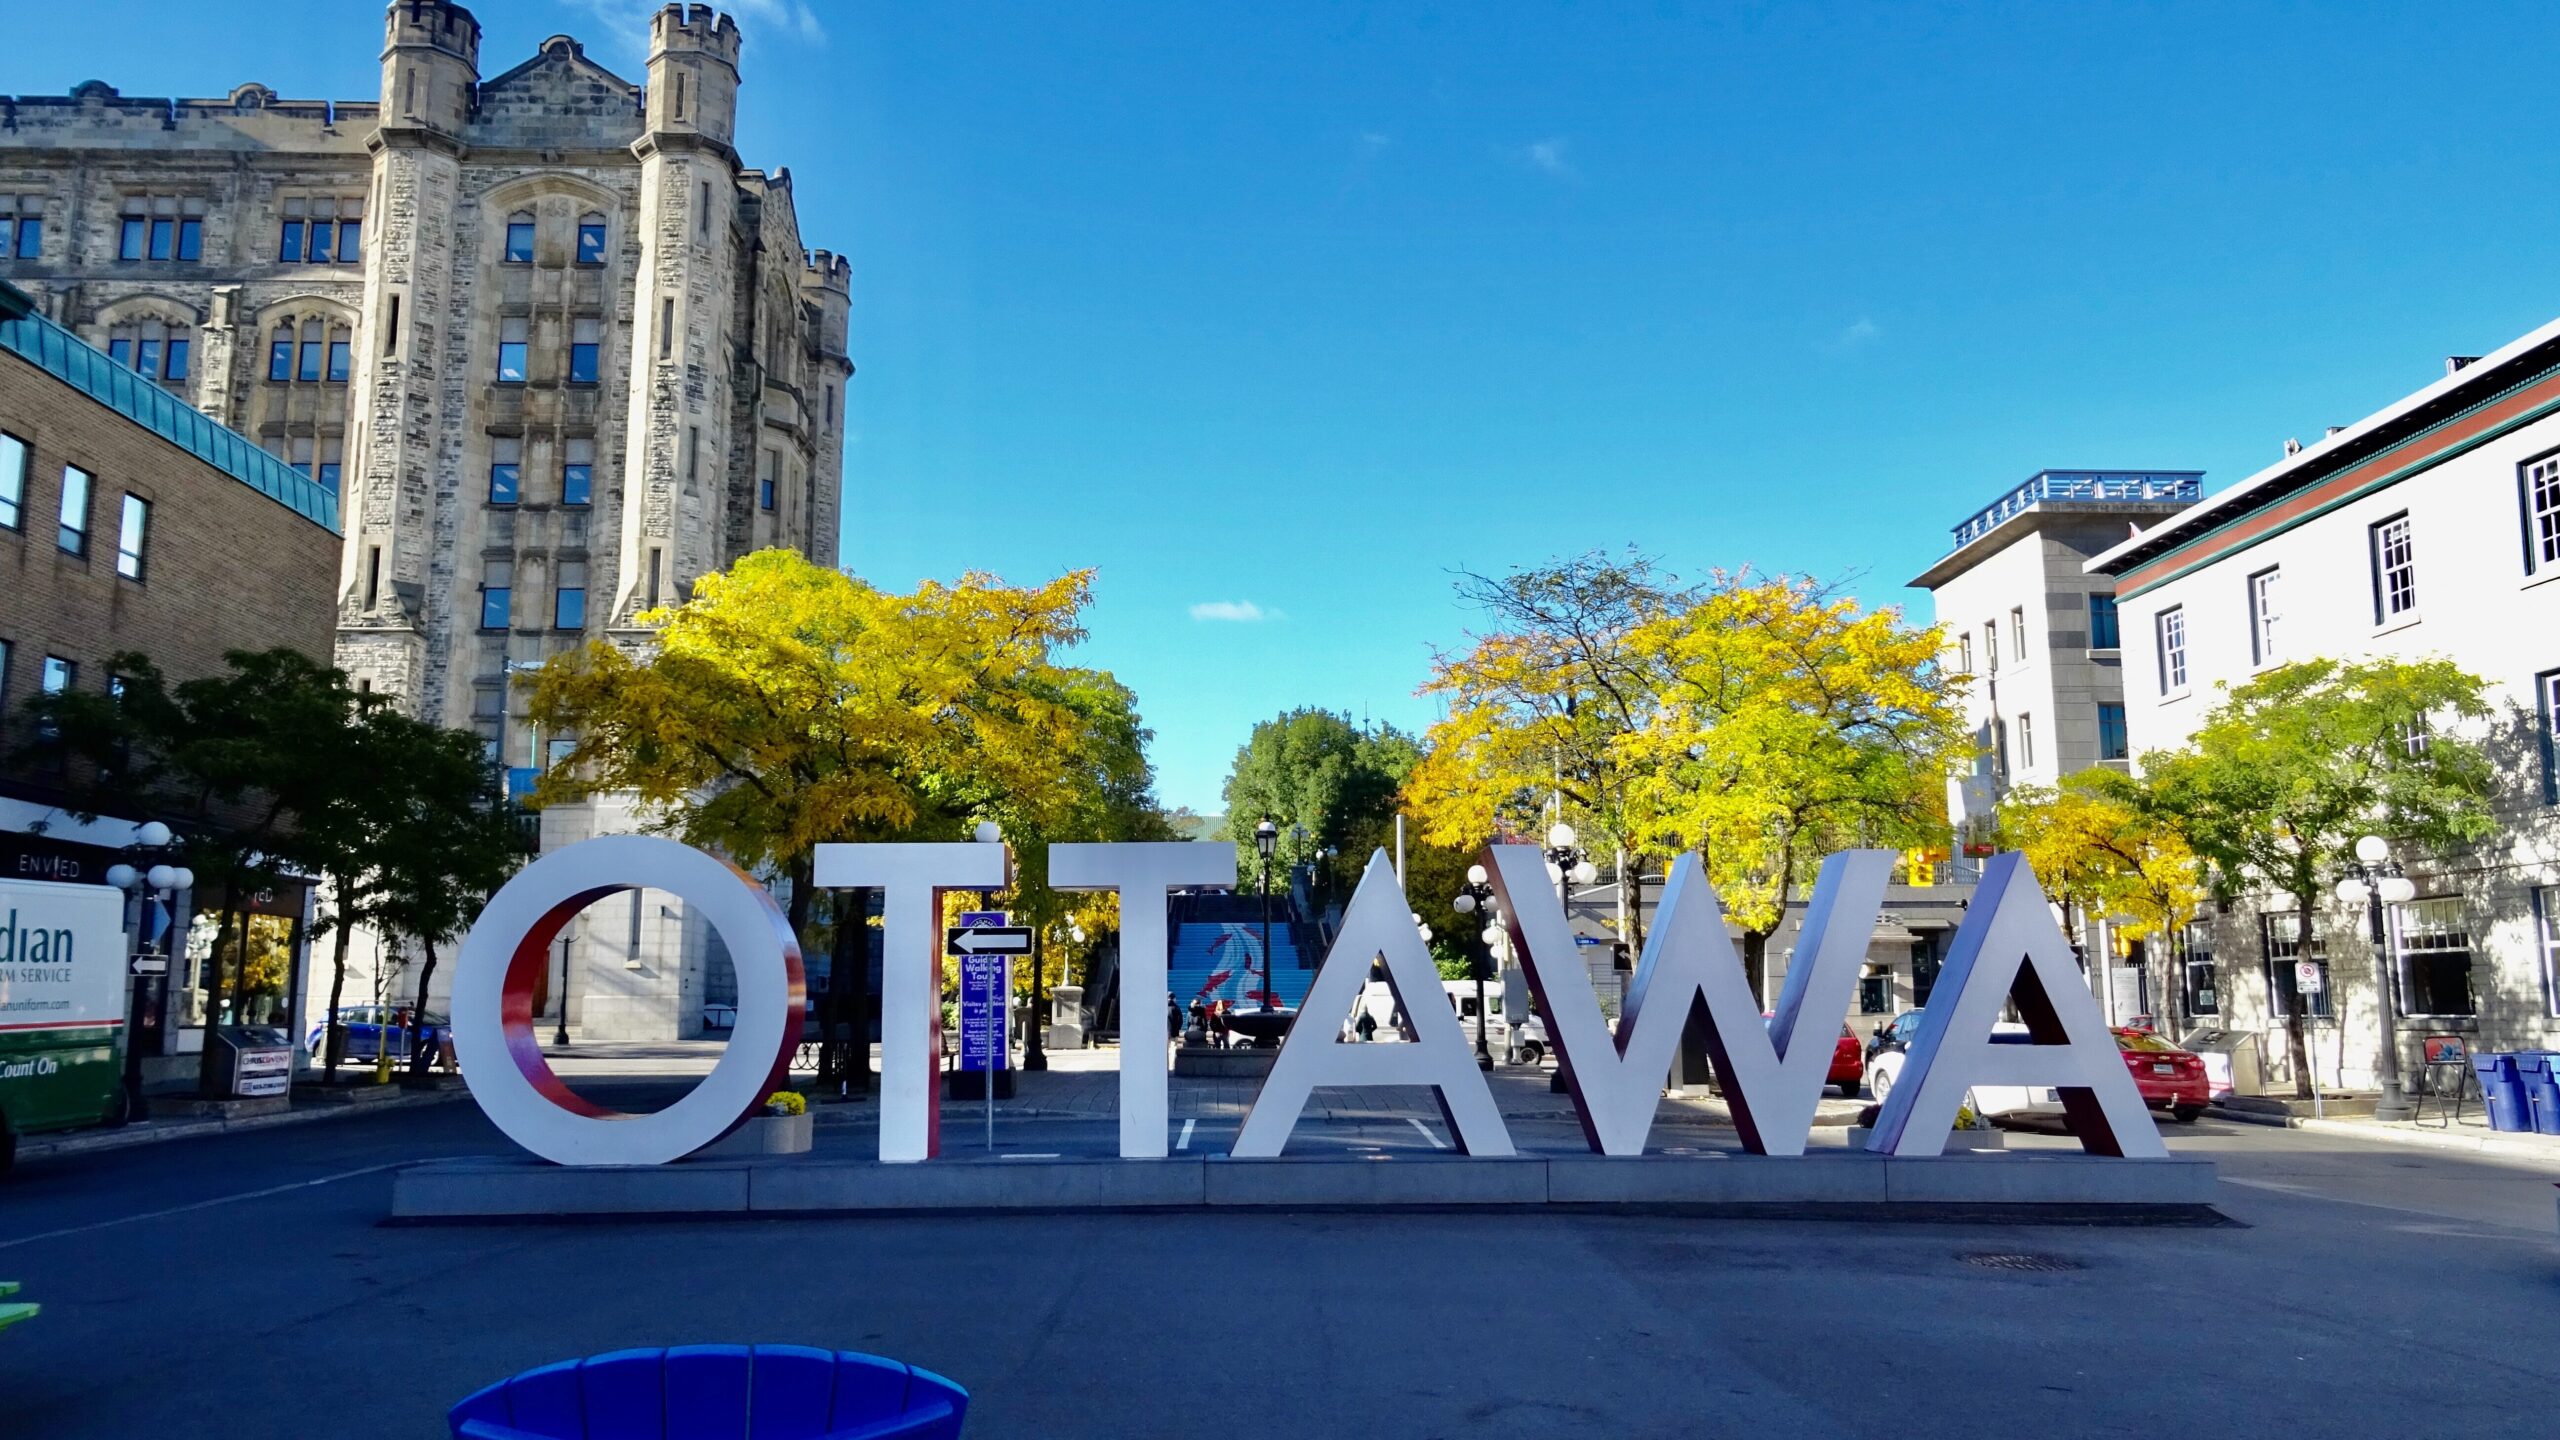 "Ottawa" sign in the foreground, buildings in the background